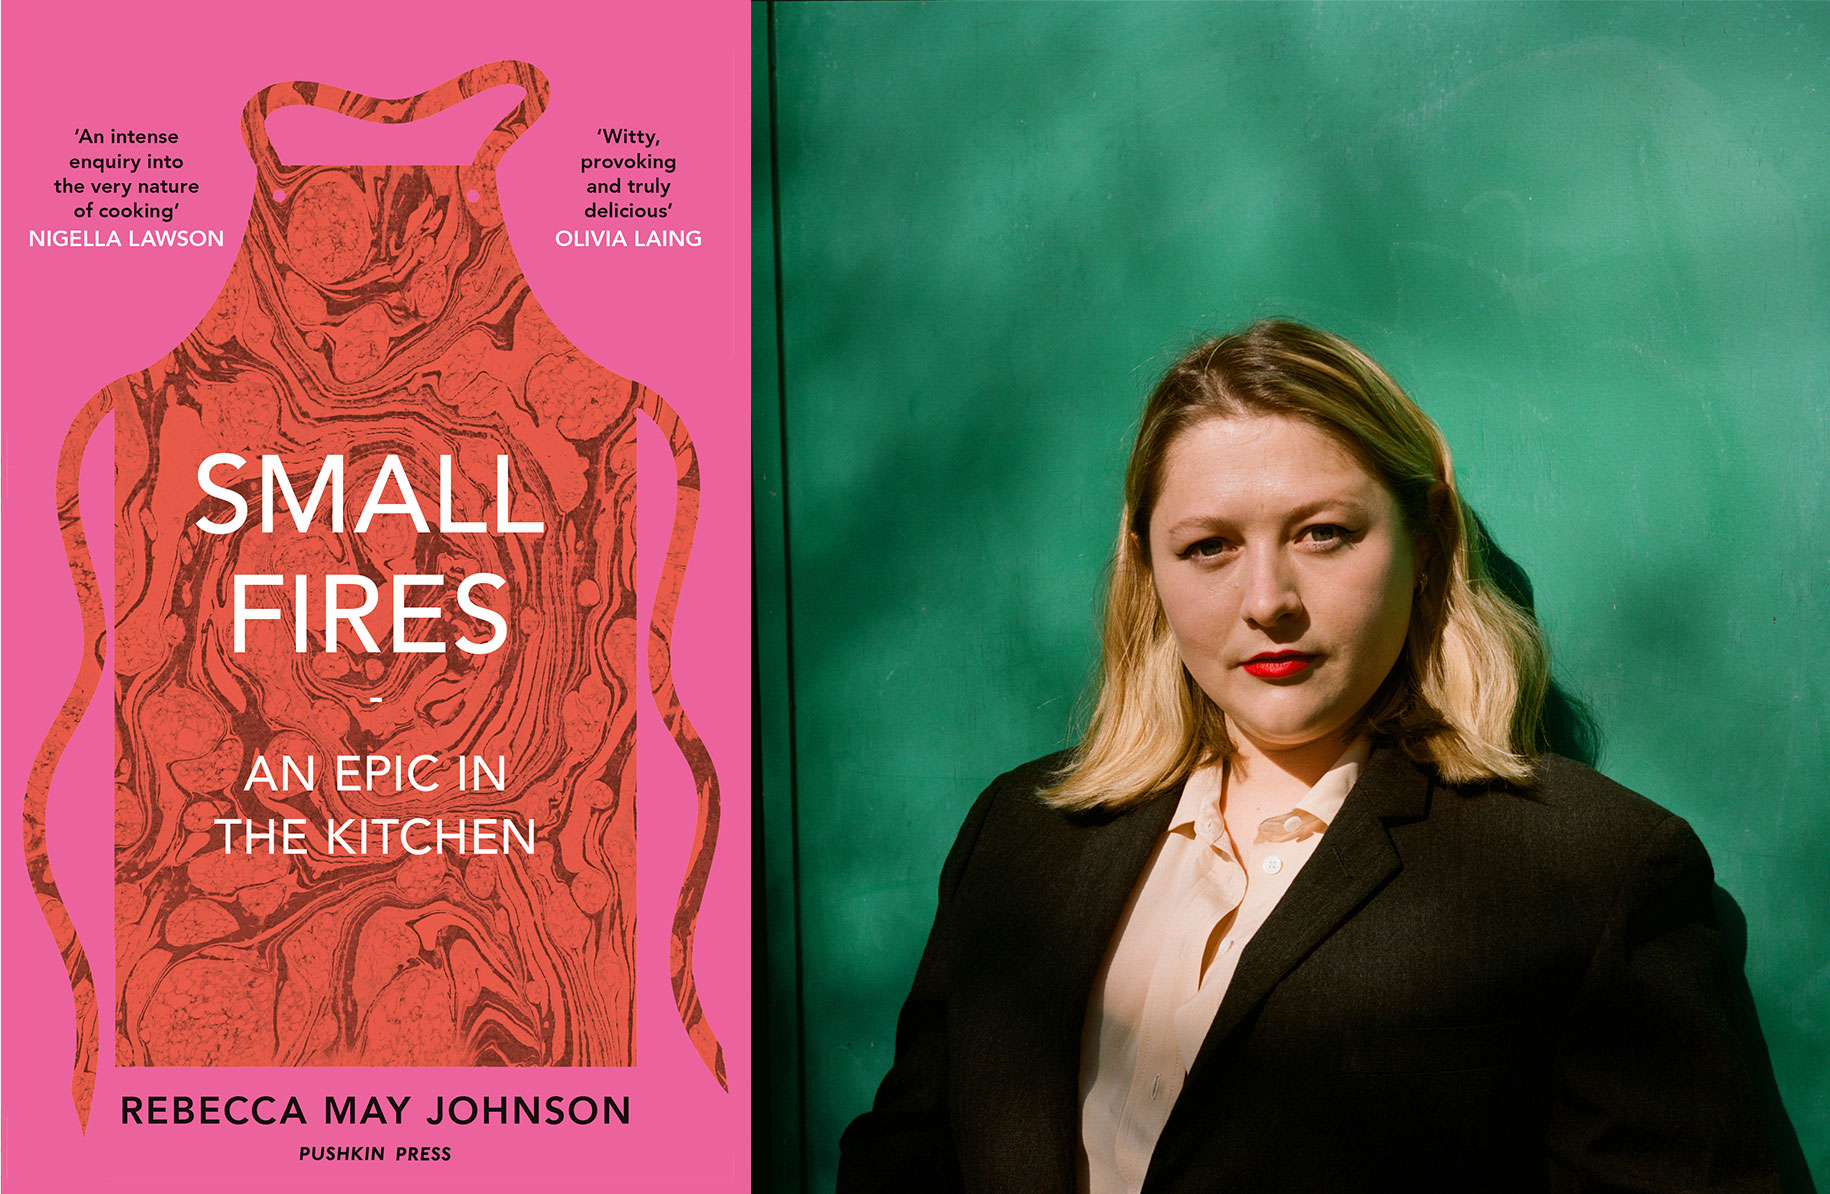 A split screen of the cover of the book “Small Fires” and a headshot of Rebecca May Johnson in which she looks at the camera against a green backdrop.